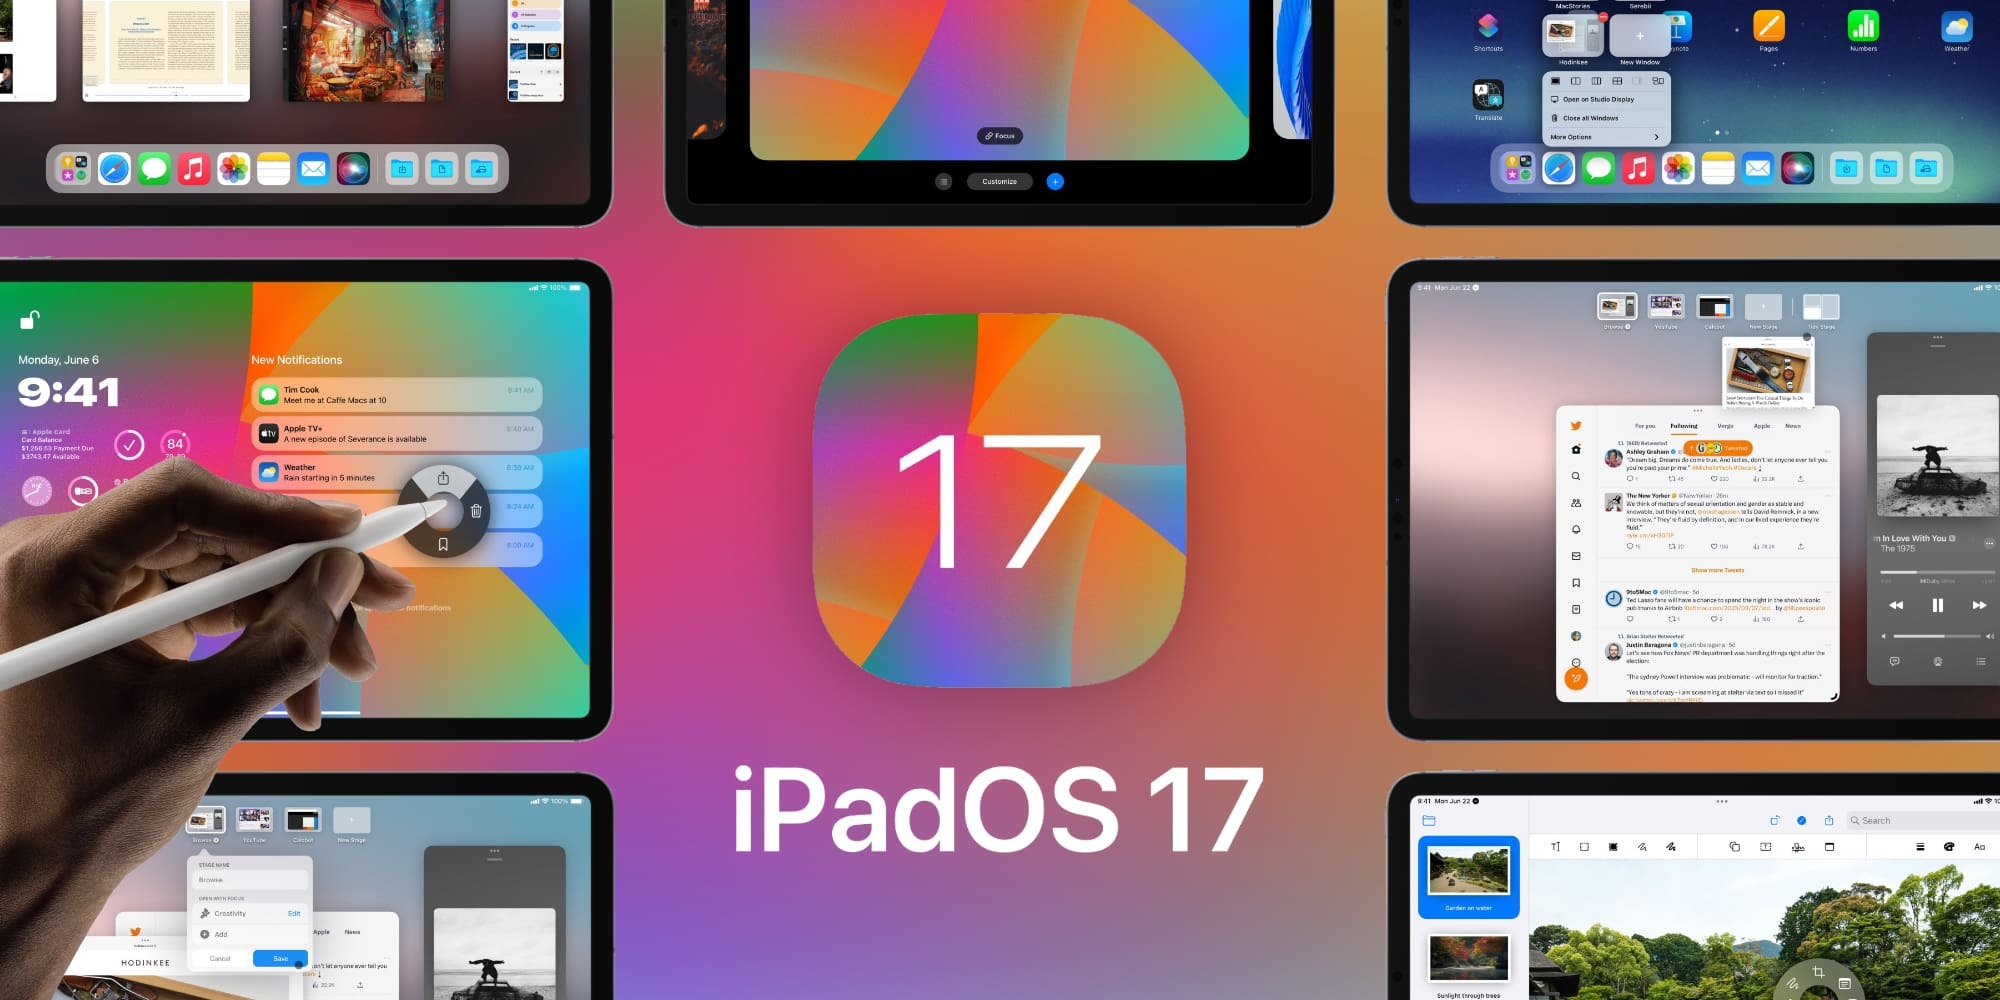 This concept visualizes what iPadOS 17 could look like